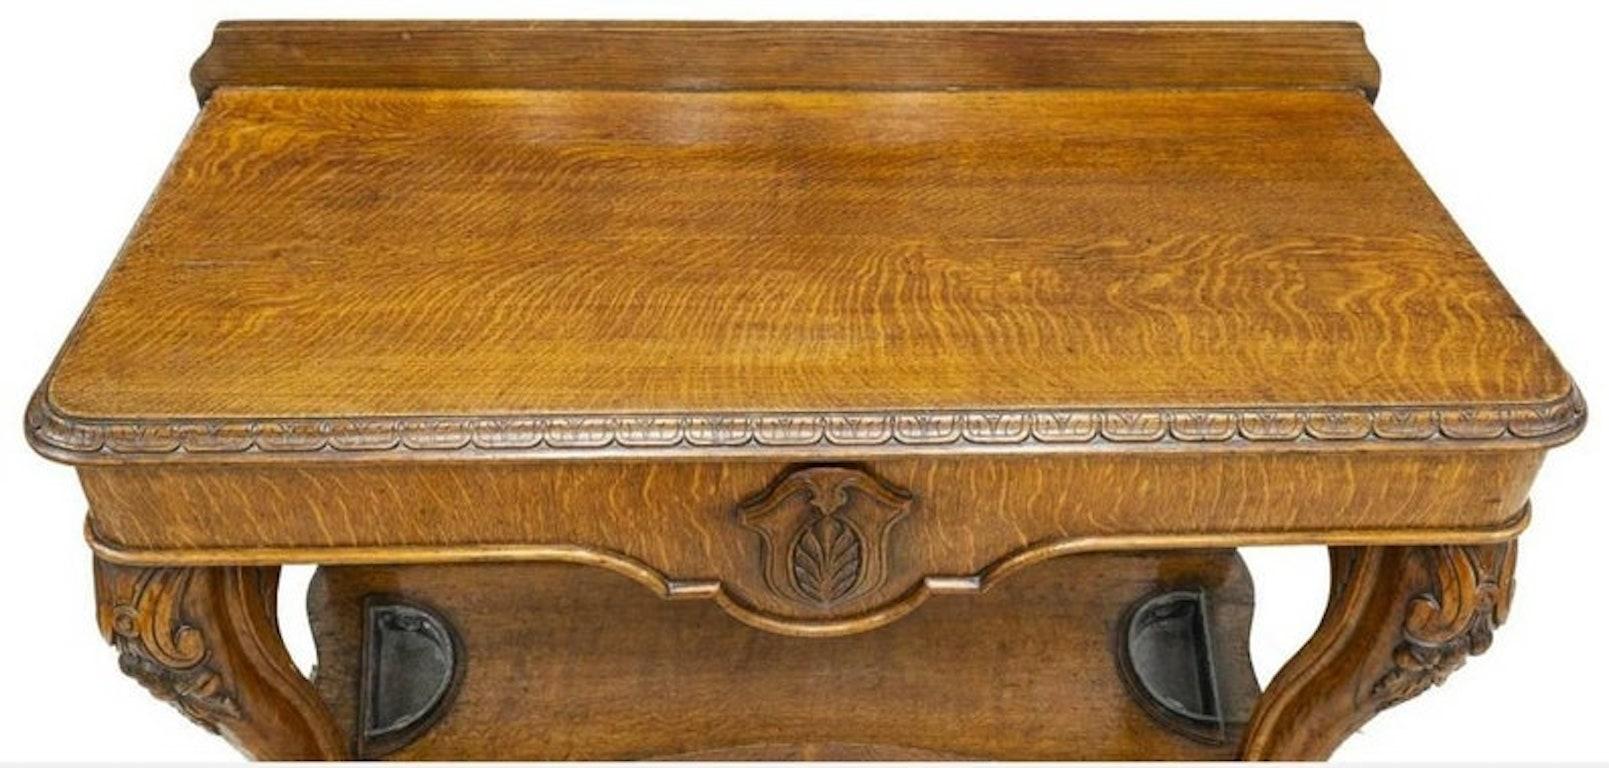 A stunning and rare, finely crafted, Victorian era hand carved golden tiger oak entryway statement table. Placed in the entry, hall or parlor, this over sized table was sure to impress any guest stopping by. Handcrafted in England during the second